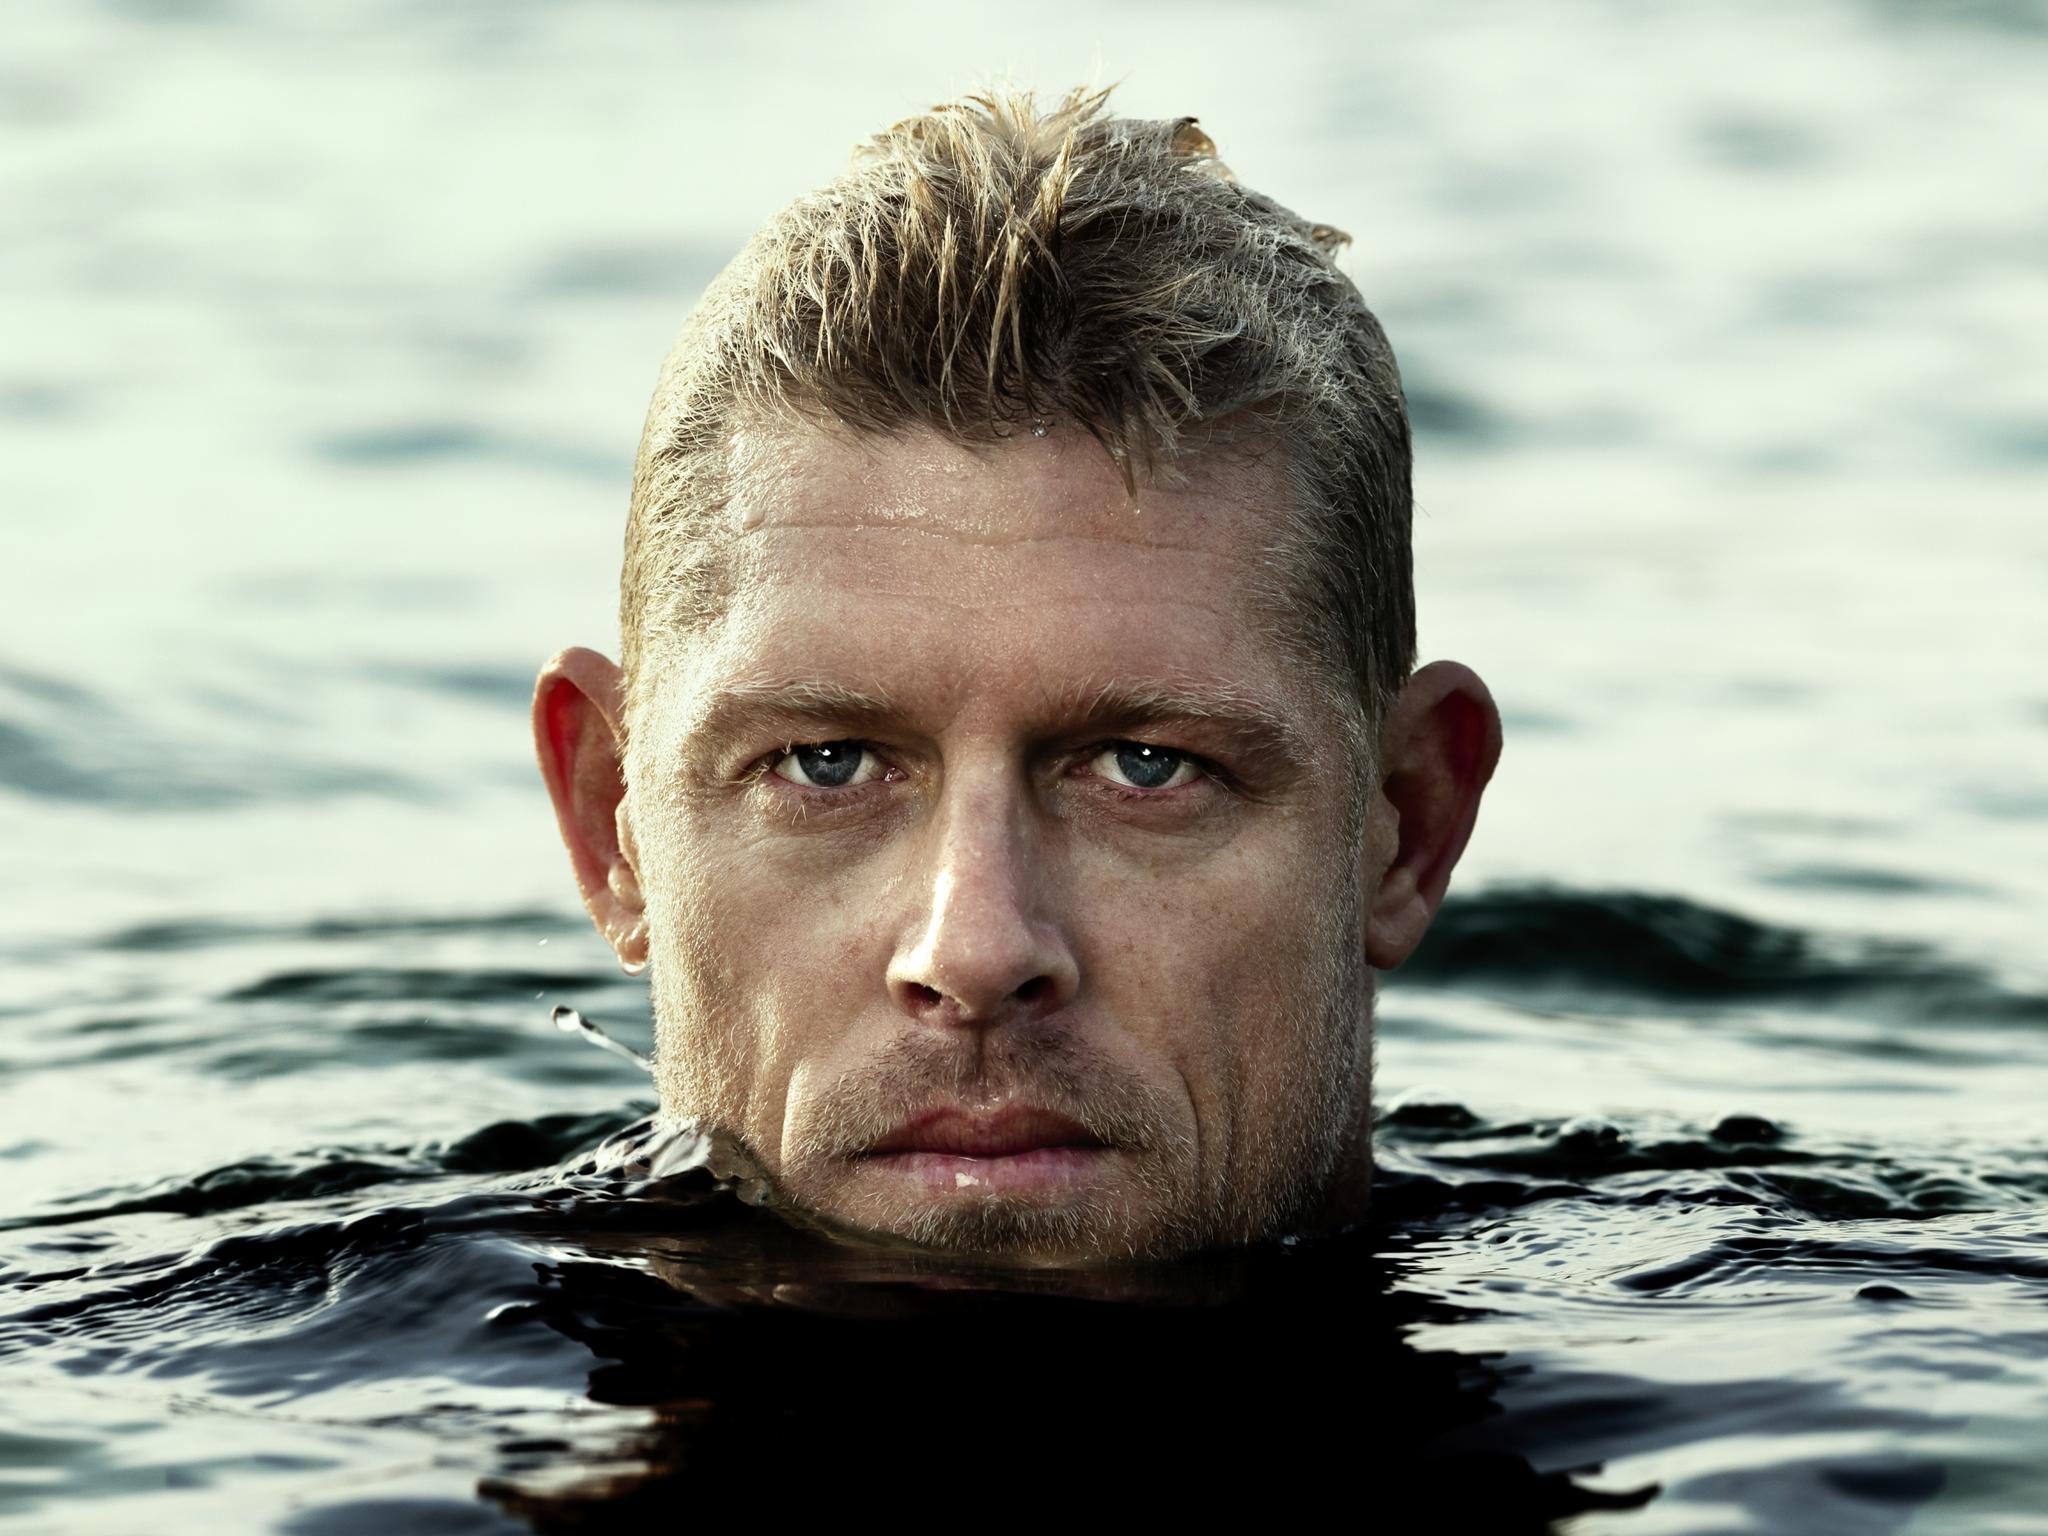 After the year hell, Mick Fanning confronts his traumas | The Australian